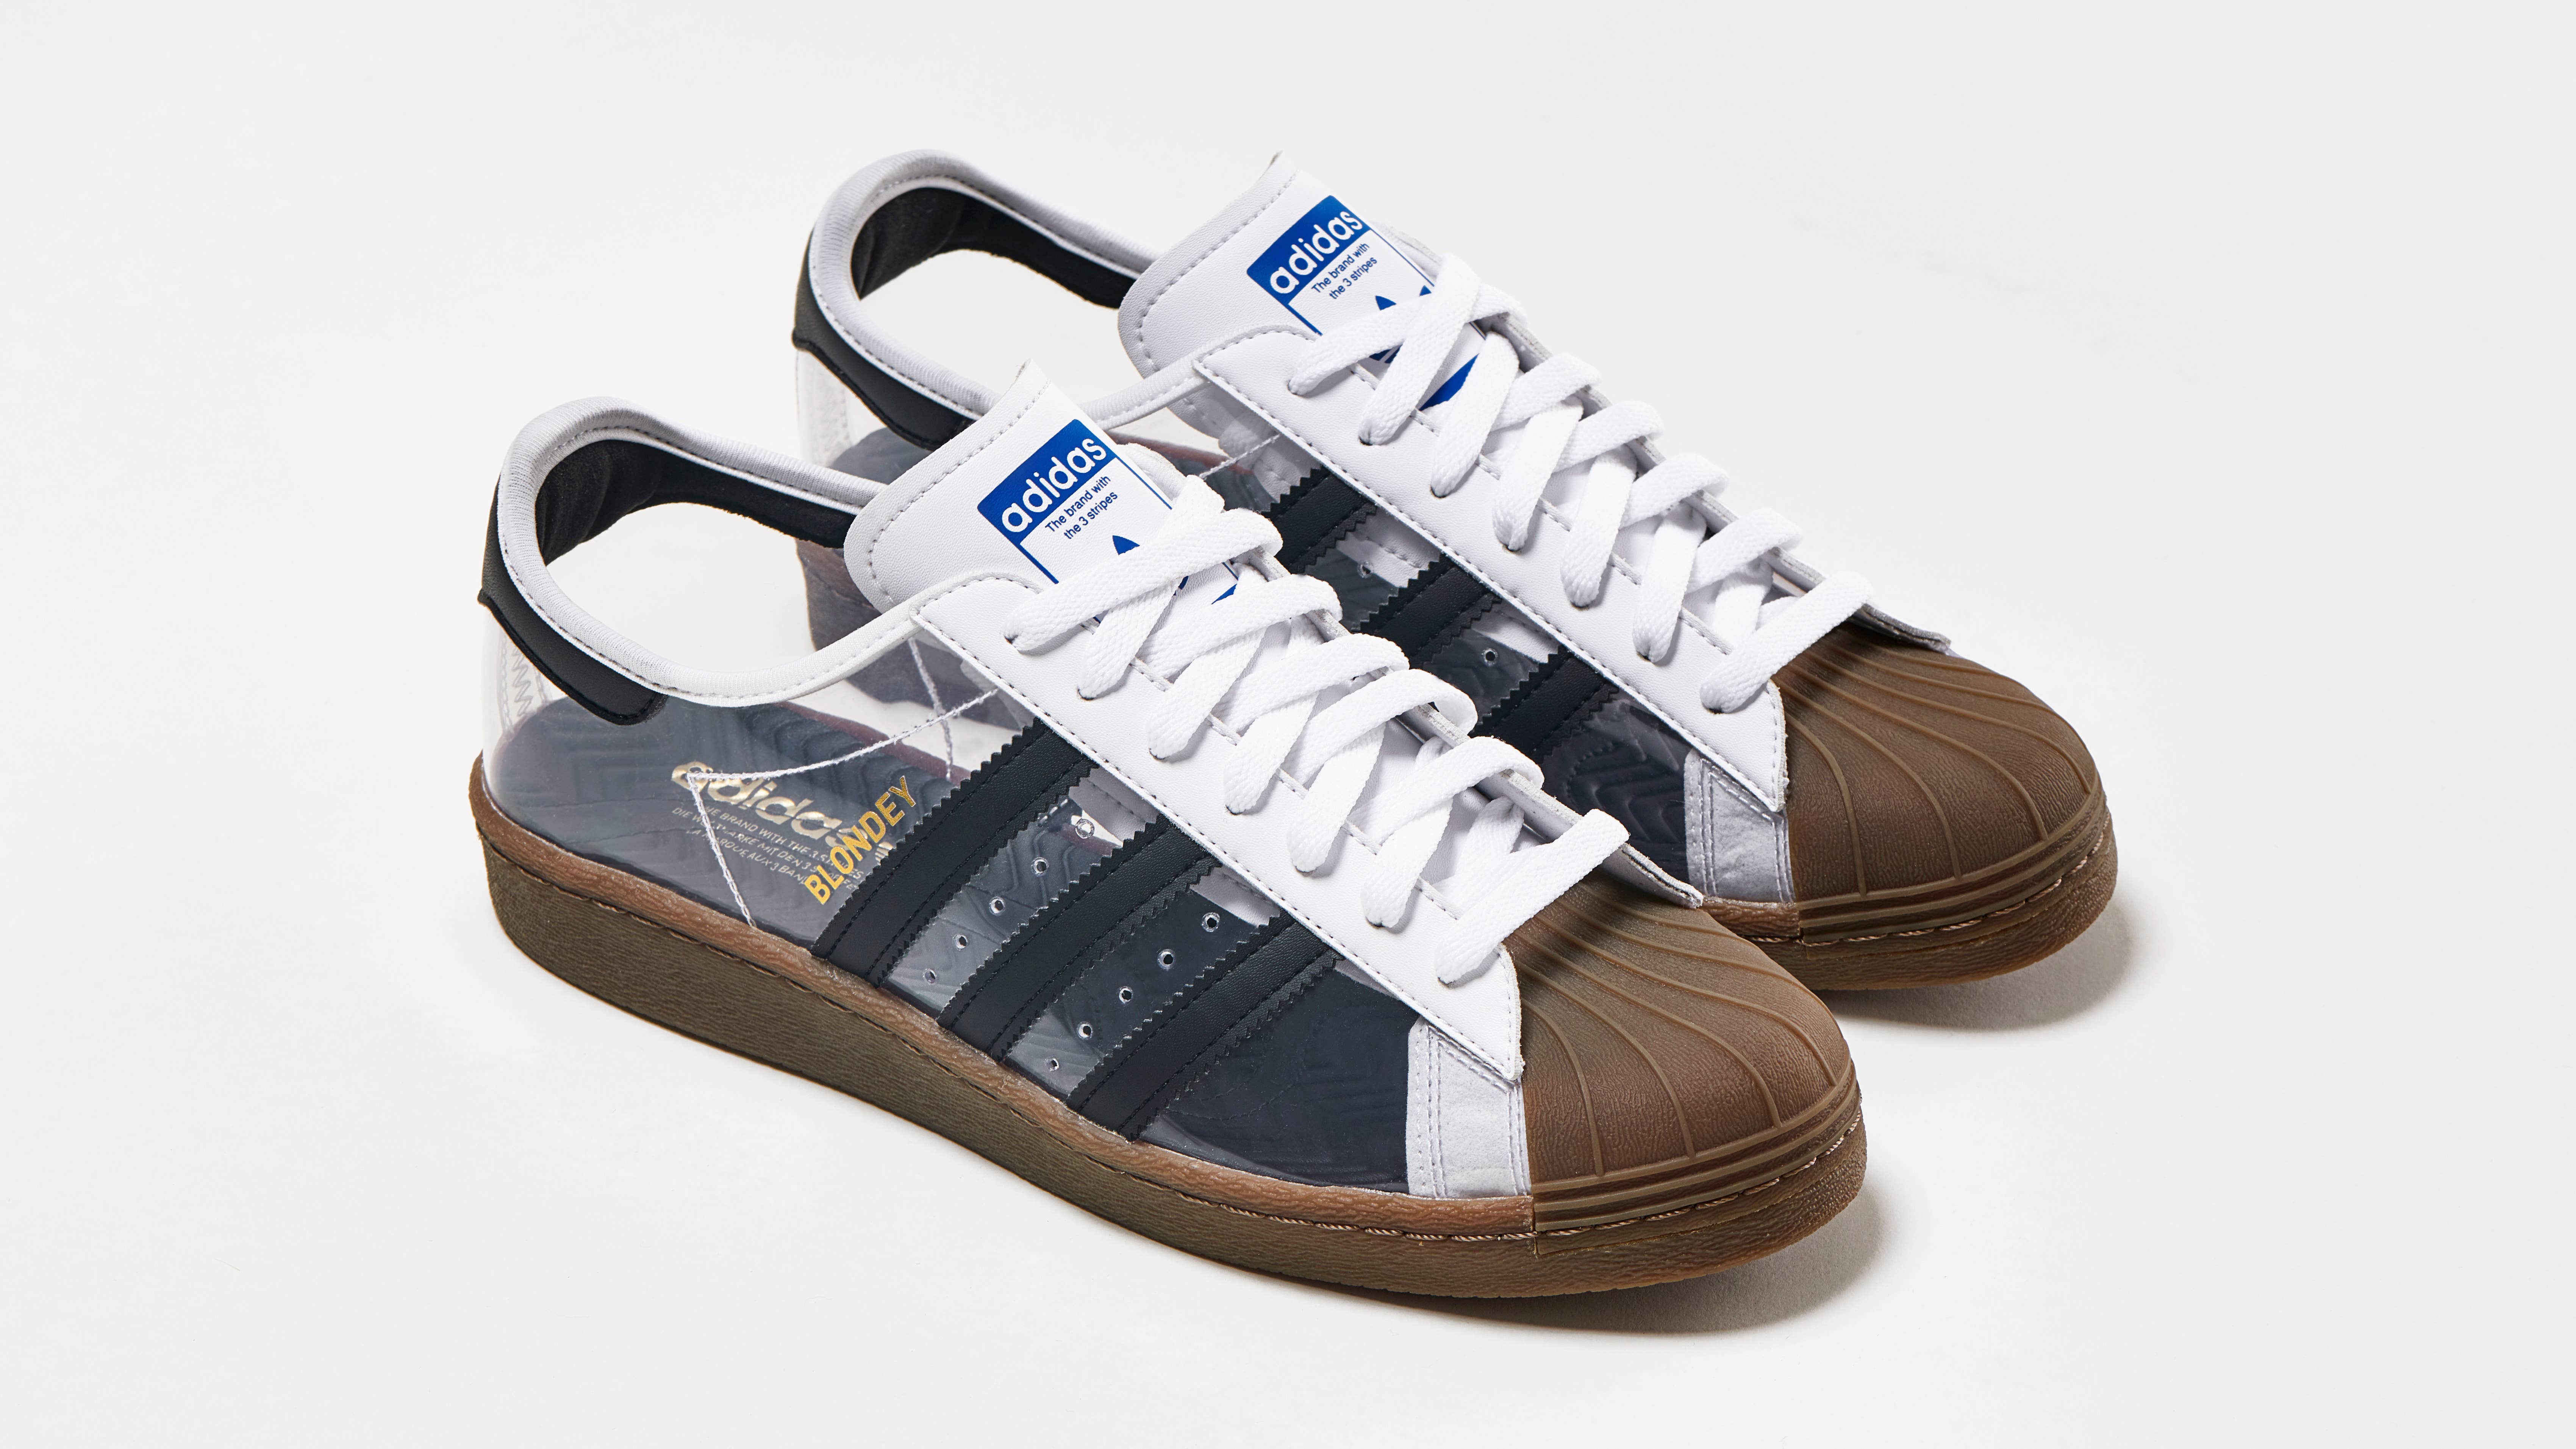 Blondey McCoy's Adidas Superstar Collab Features a Translucent Upper |  Complex